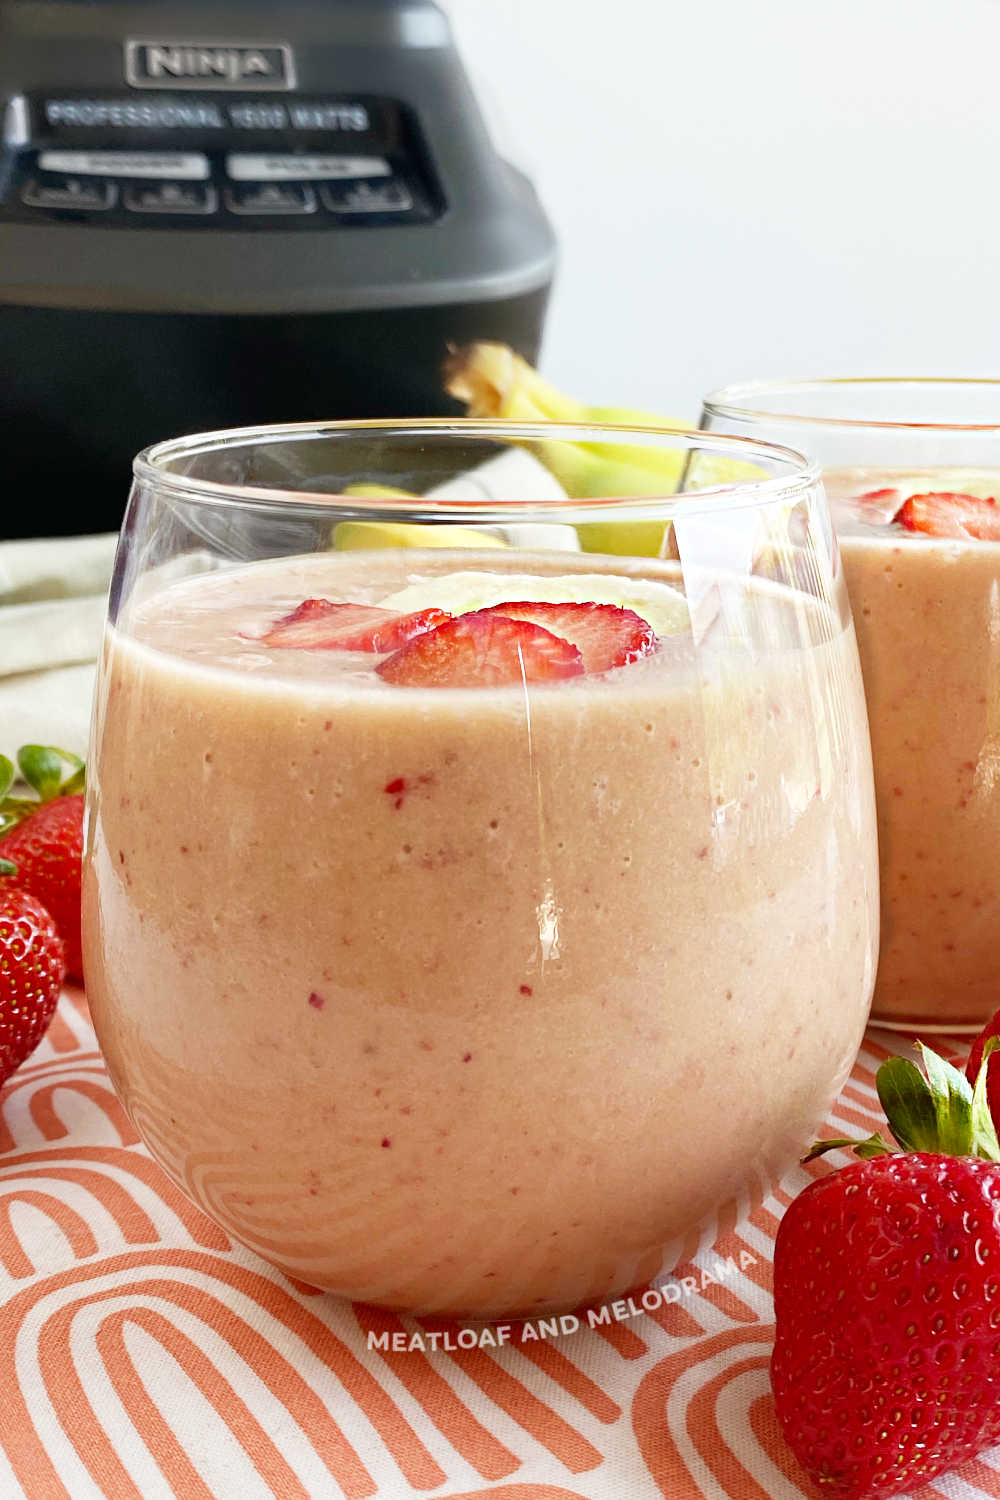 strawberry banana breakfast smoothie with protein powder in glass in front of ninja blender